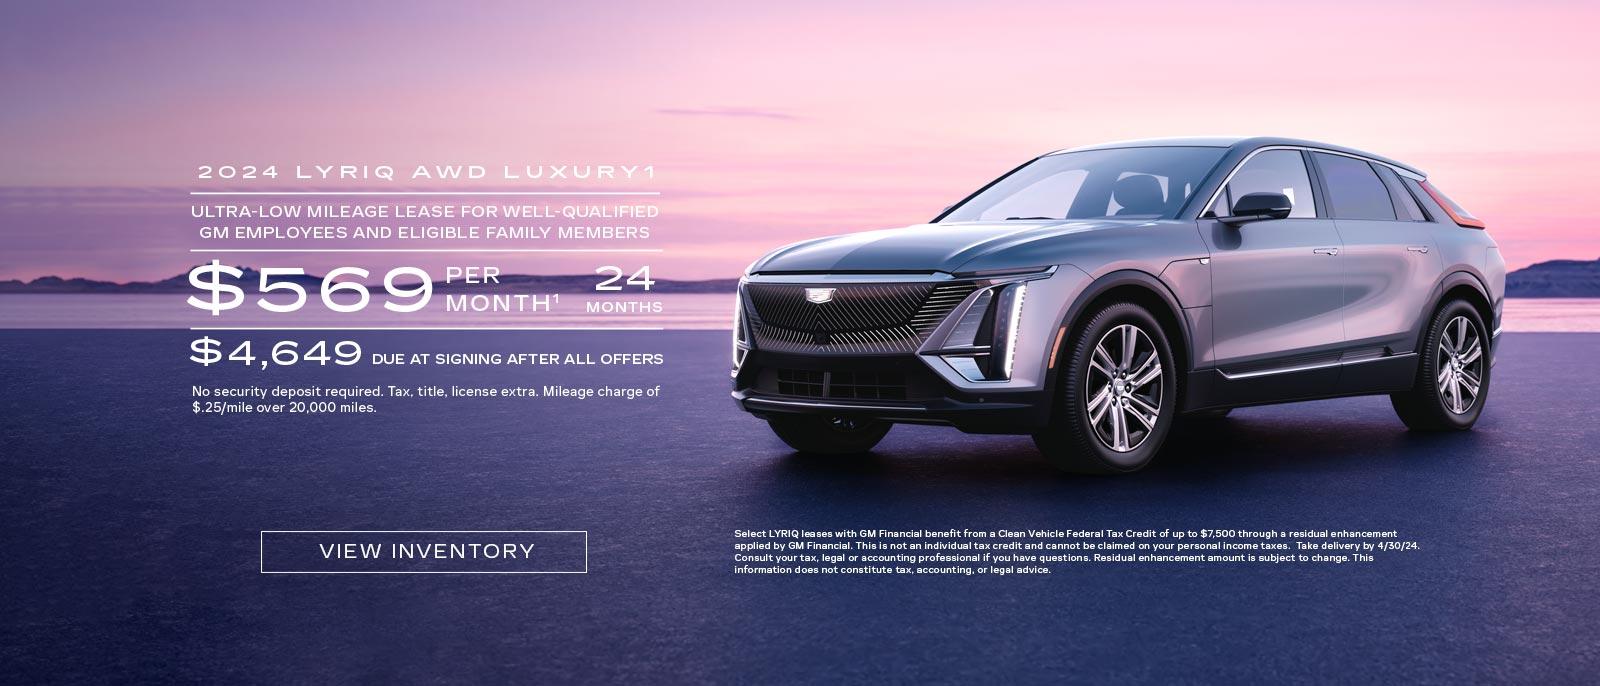 2024 LYRIQ Luxury 1. Ultra-low mileage lease for well-qualified current eligible GM employees and eligible family members. $569 per month. 24 months. $4,649 due at signing after all offers.